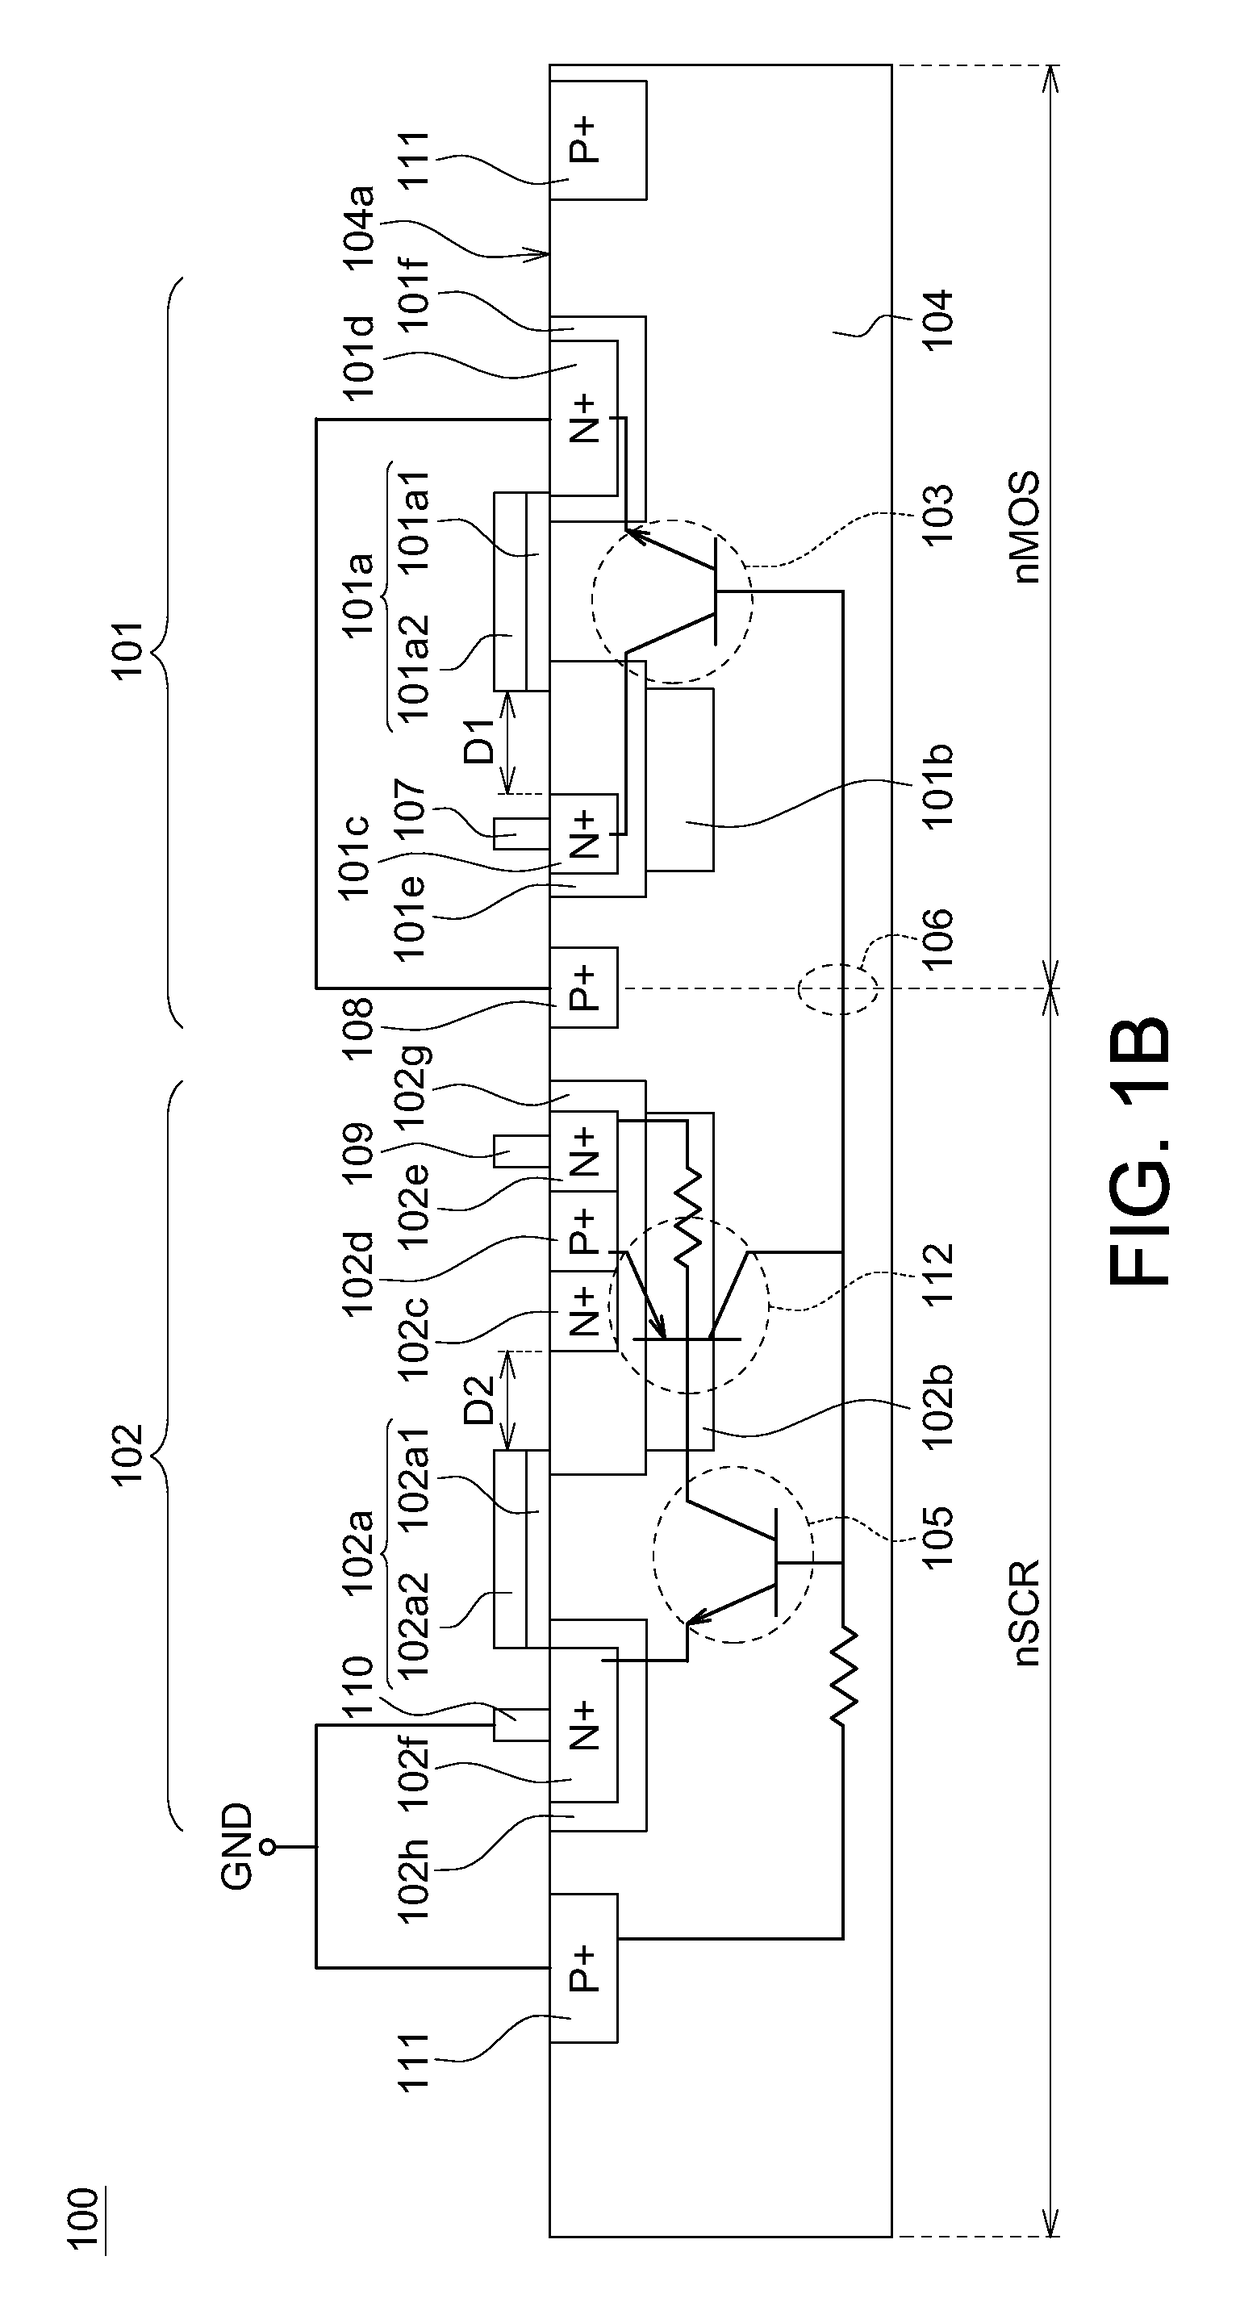 Electrostatic discharge protection device with parasitic bipolar junction transistors